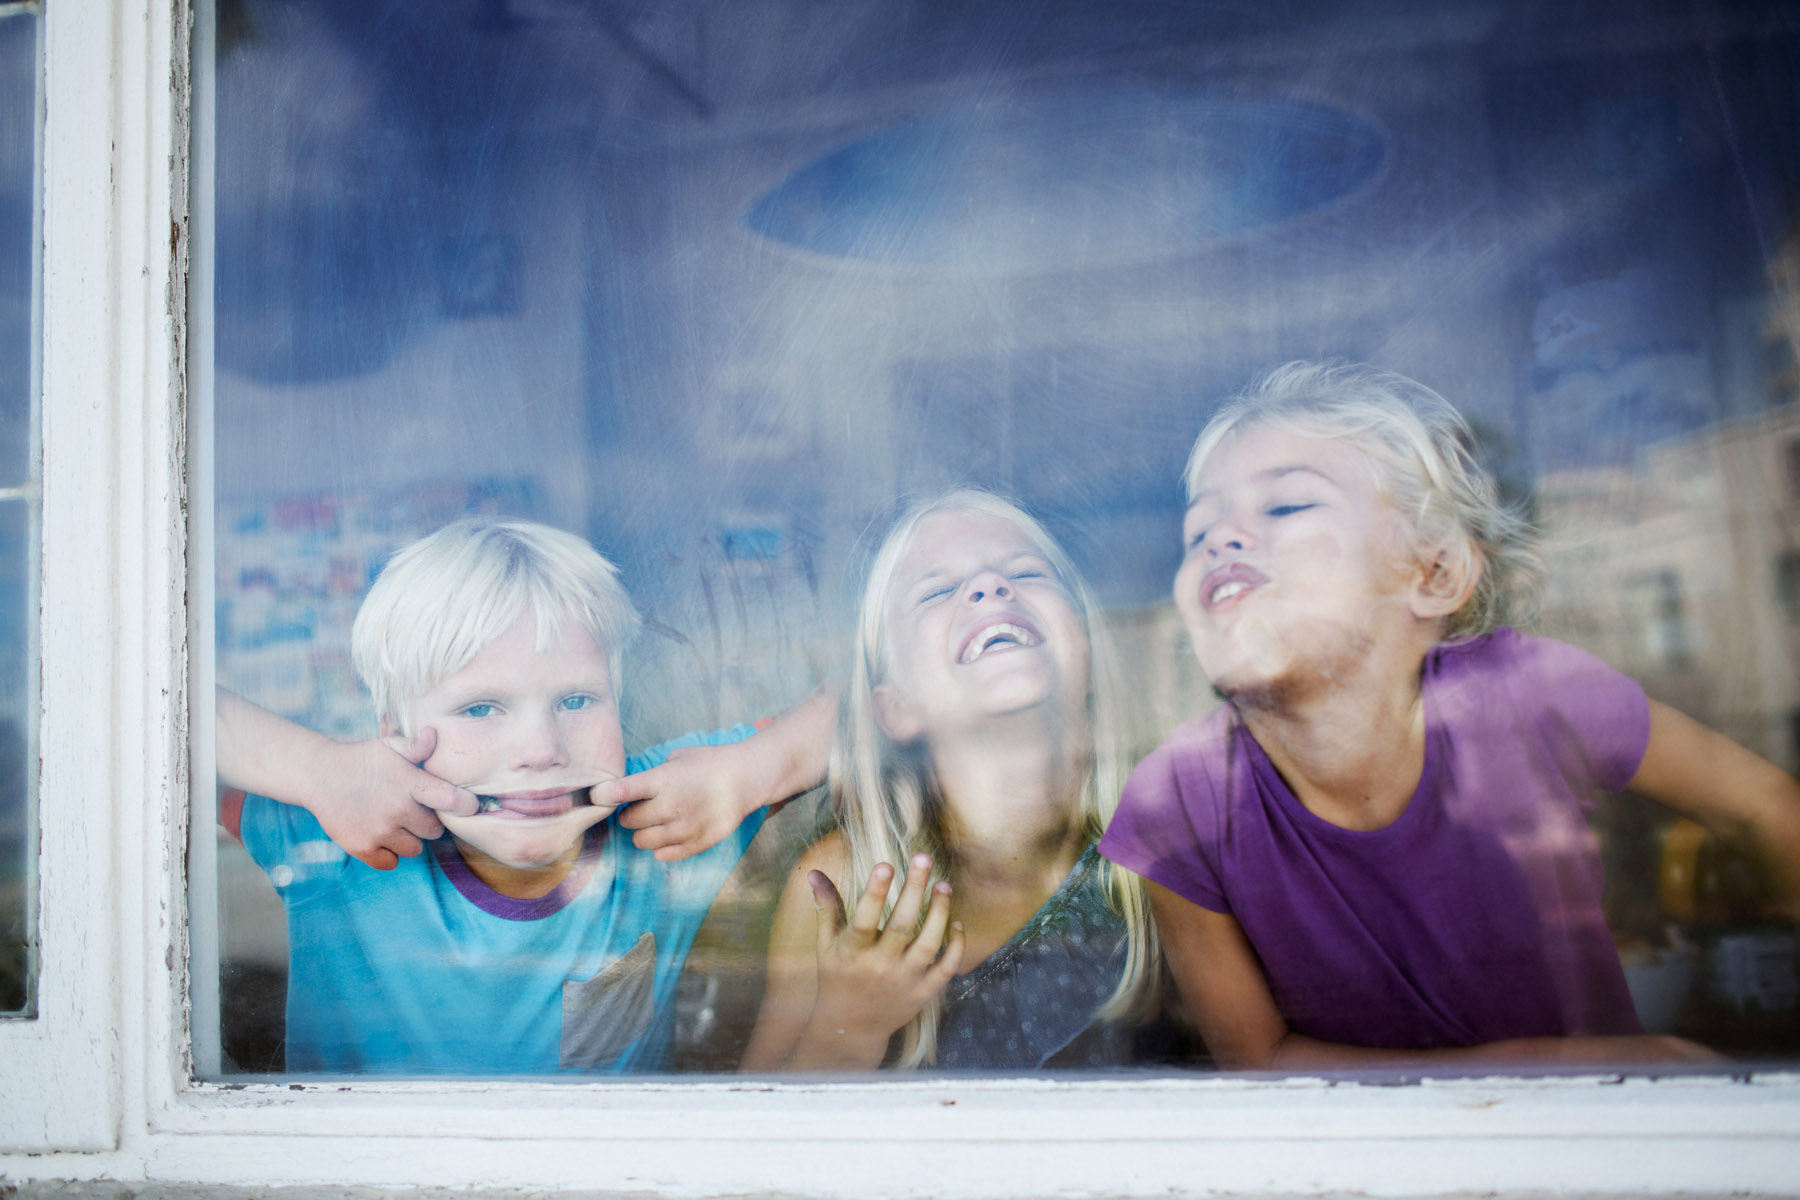 Kids making funny faces behind window